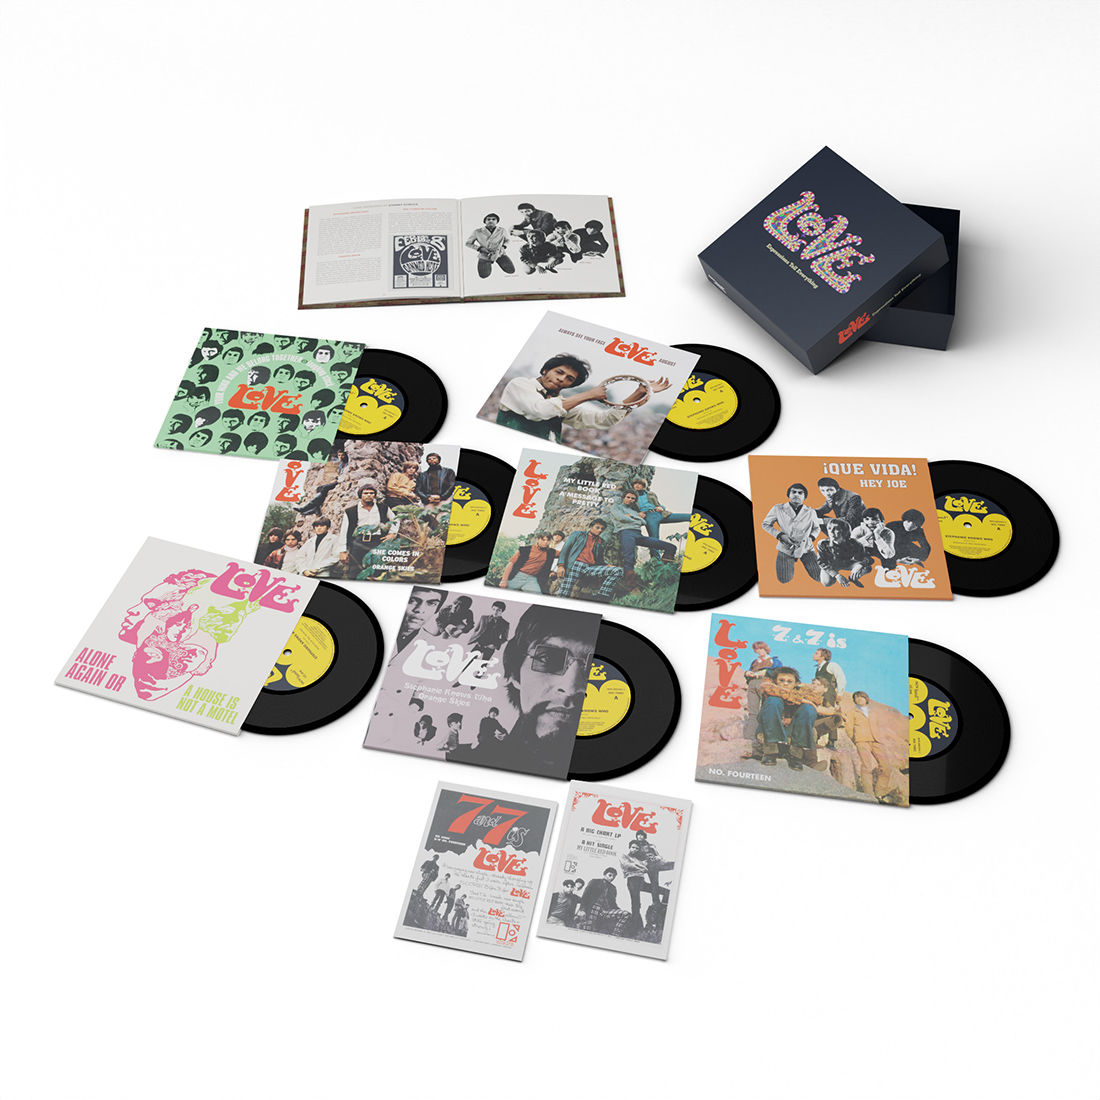 Expressions Tell Everything: 7" Single Box Set